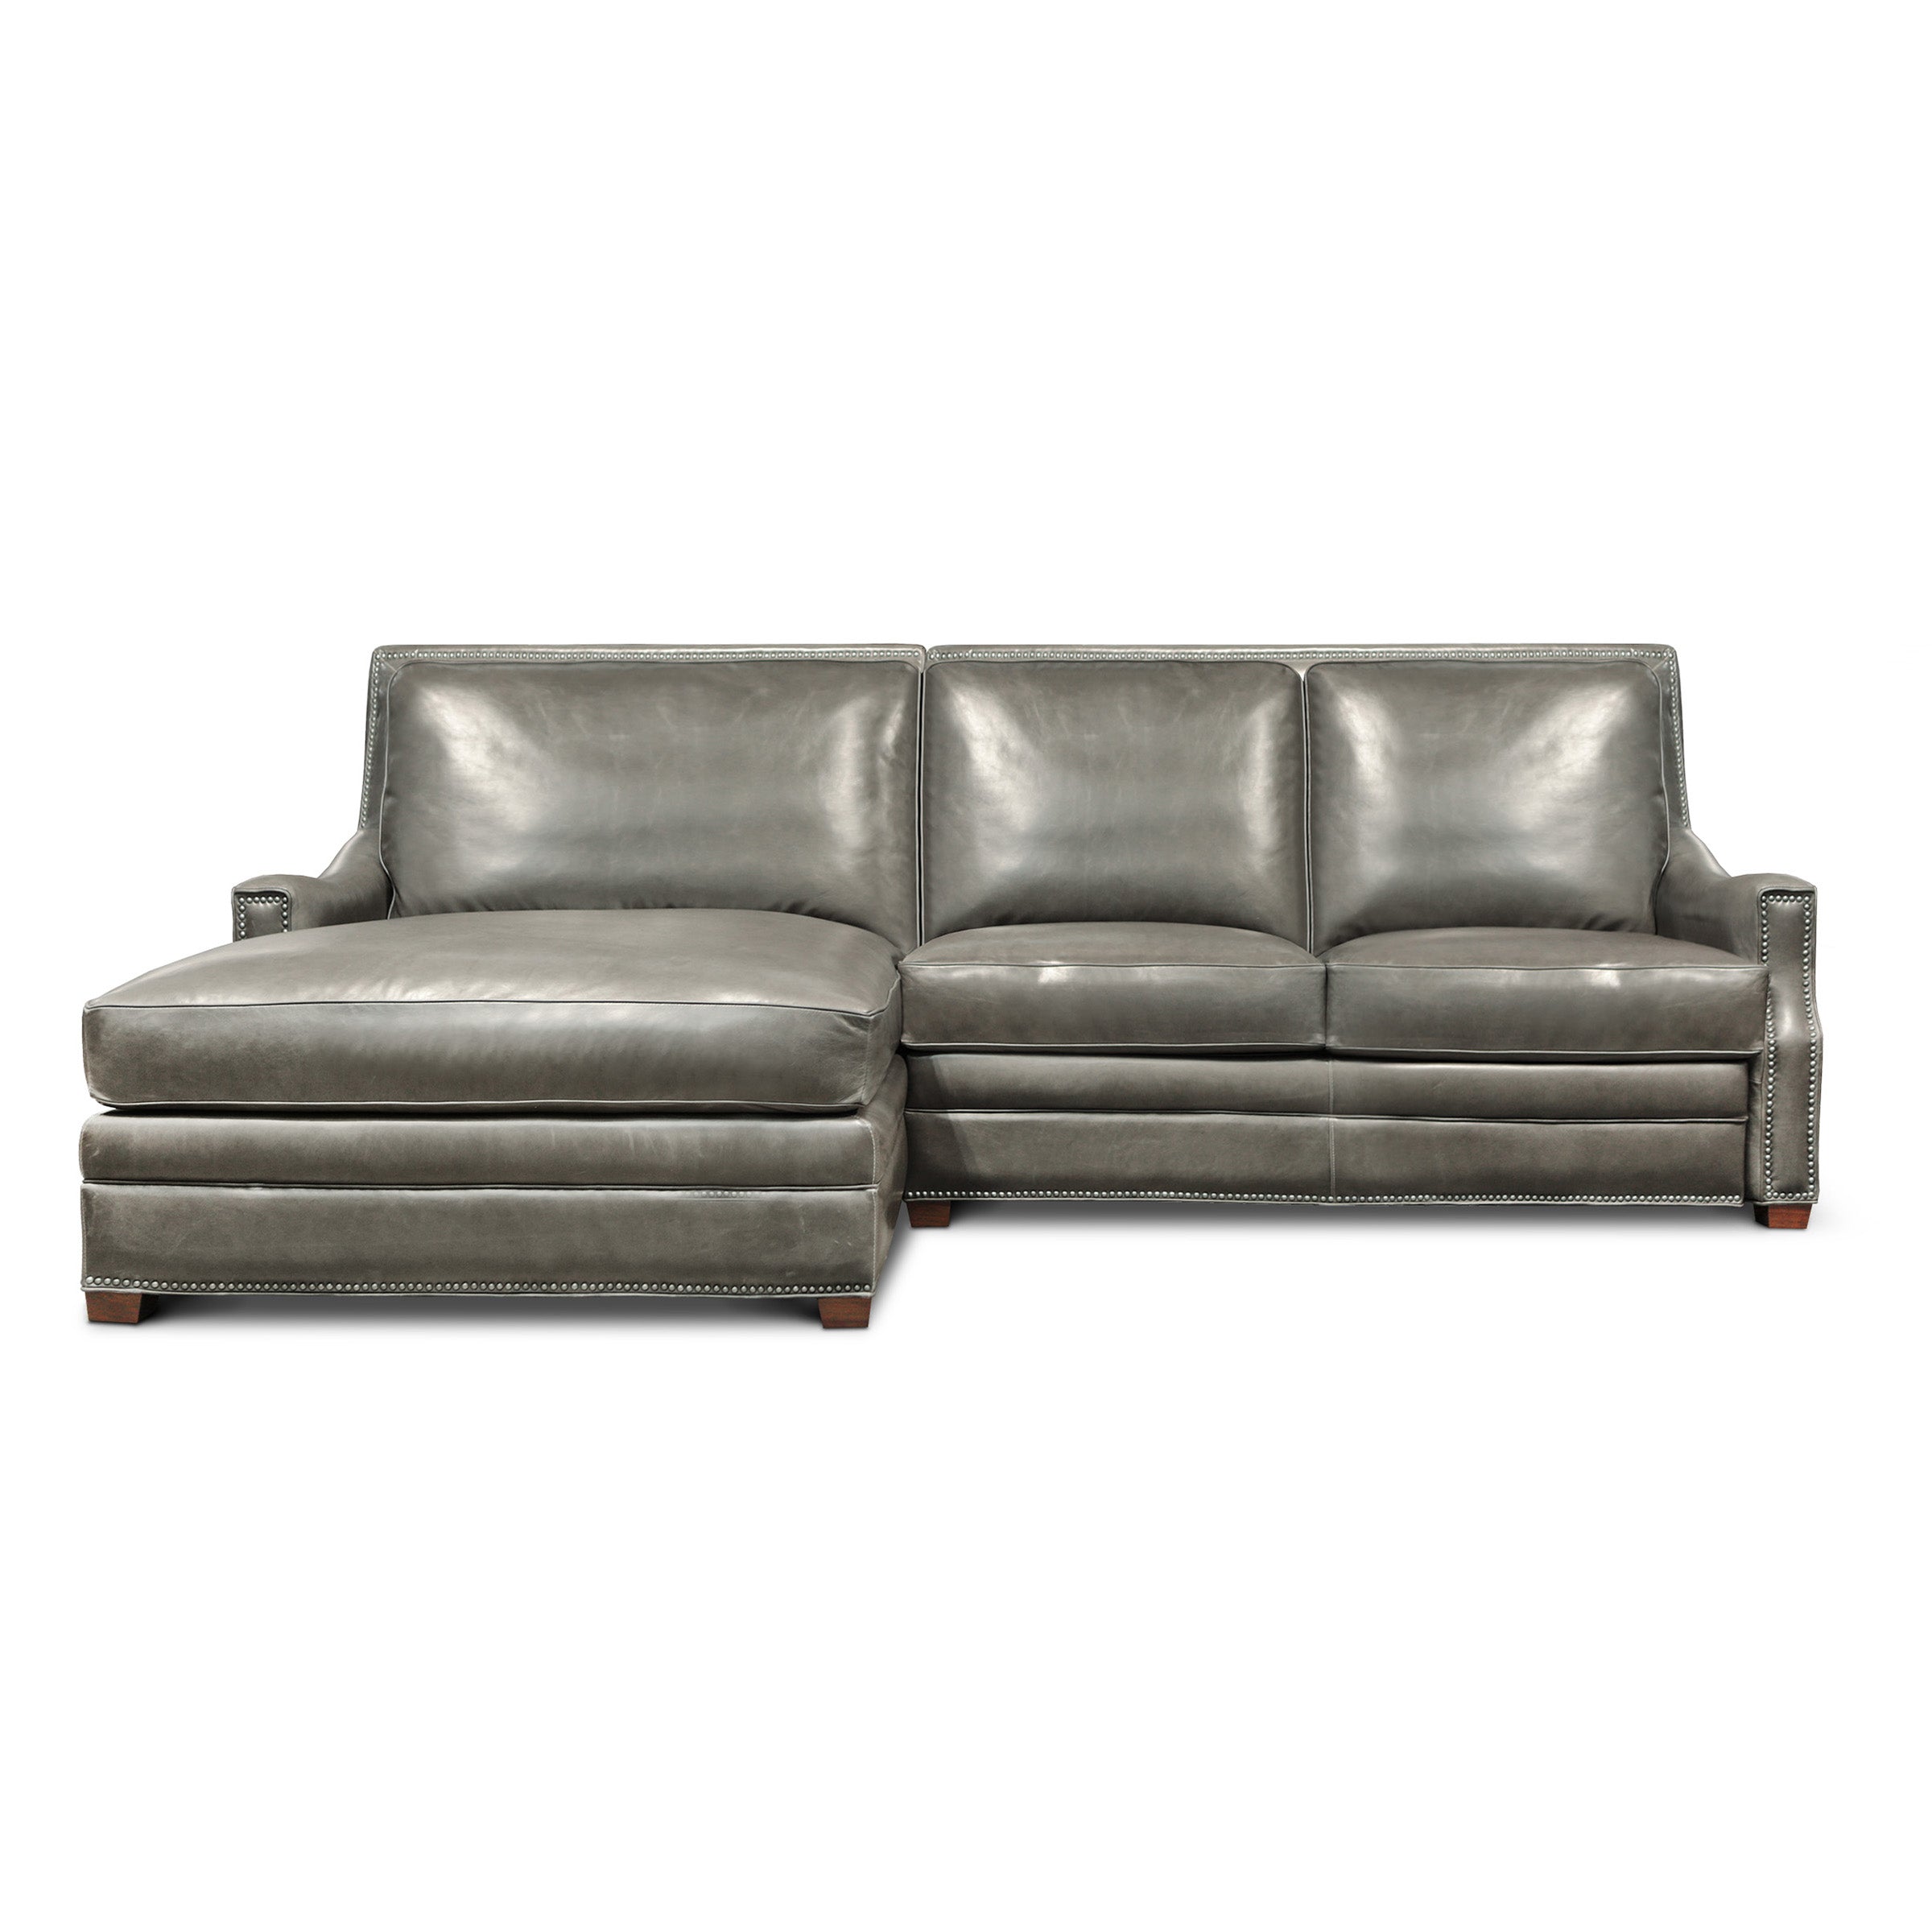 Eleanor Rigby Daniella Sectional (Loveseat + Chaise)